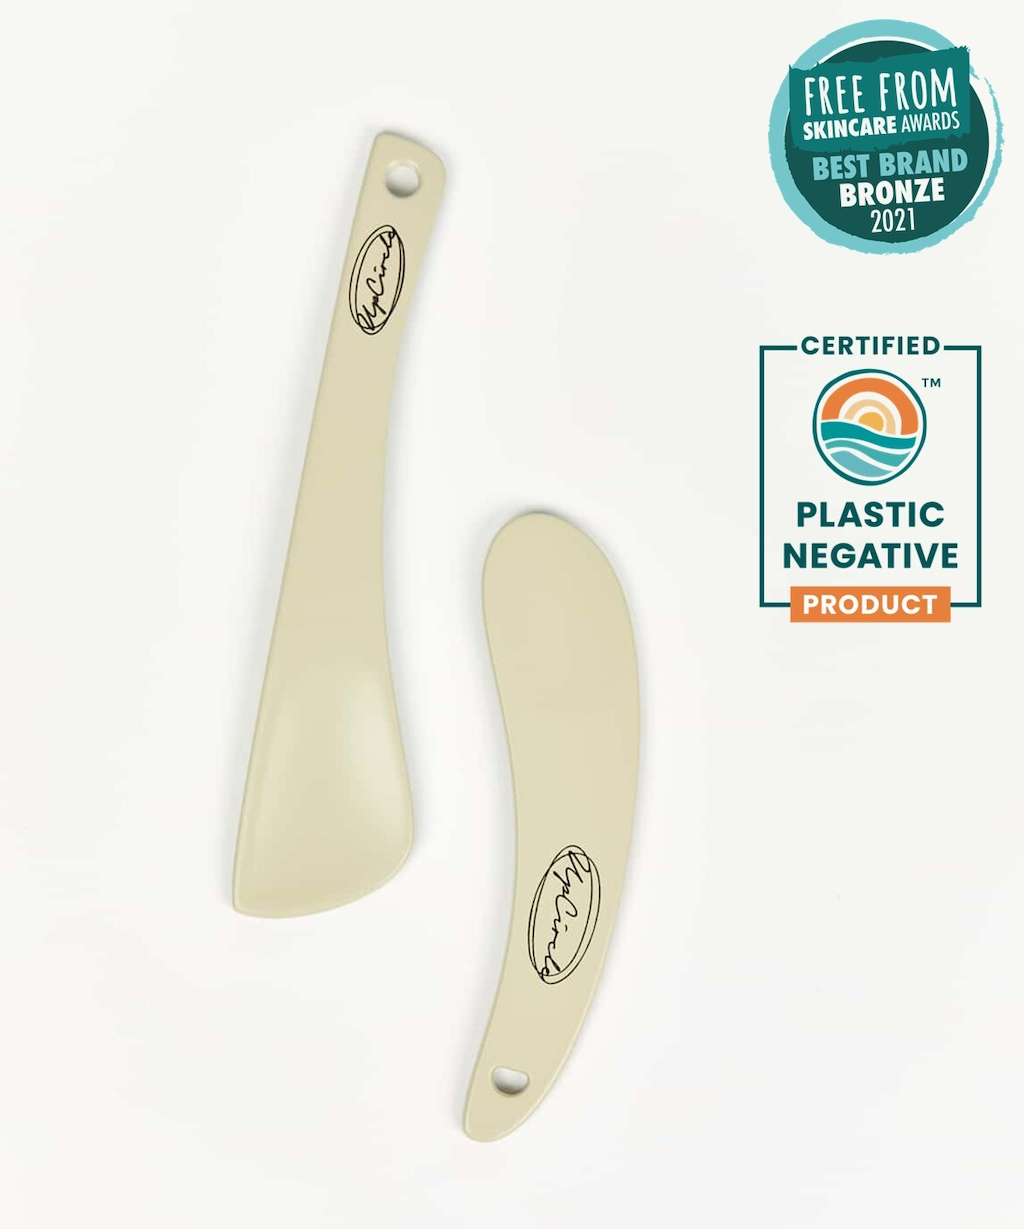 Upcricle Cosmetic Spatulas. Plastic free beauty. The spatulas are pictured on a white surface, with a logo certifying the product as "Plastic Negative" and the label for an award from the Free From Skincare Awards for Bronze in Best Brand 2021.